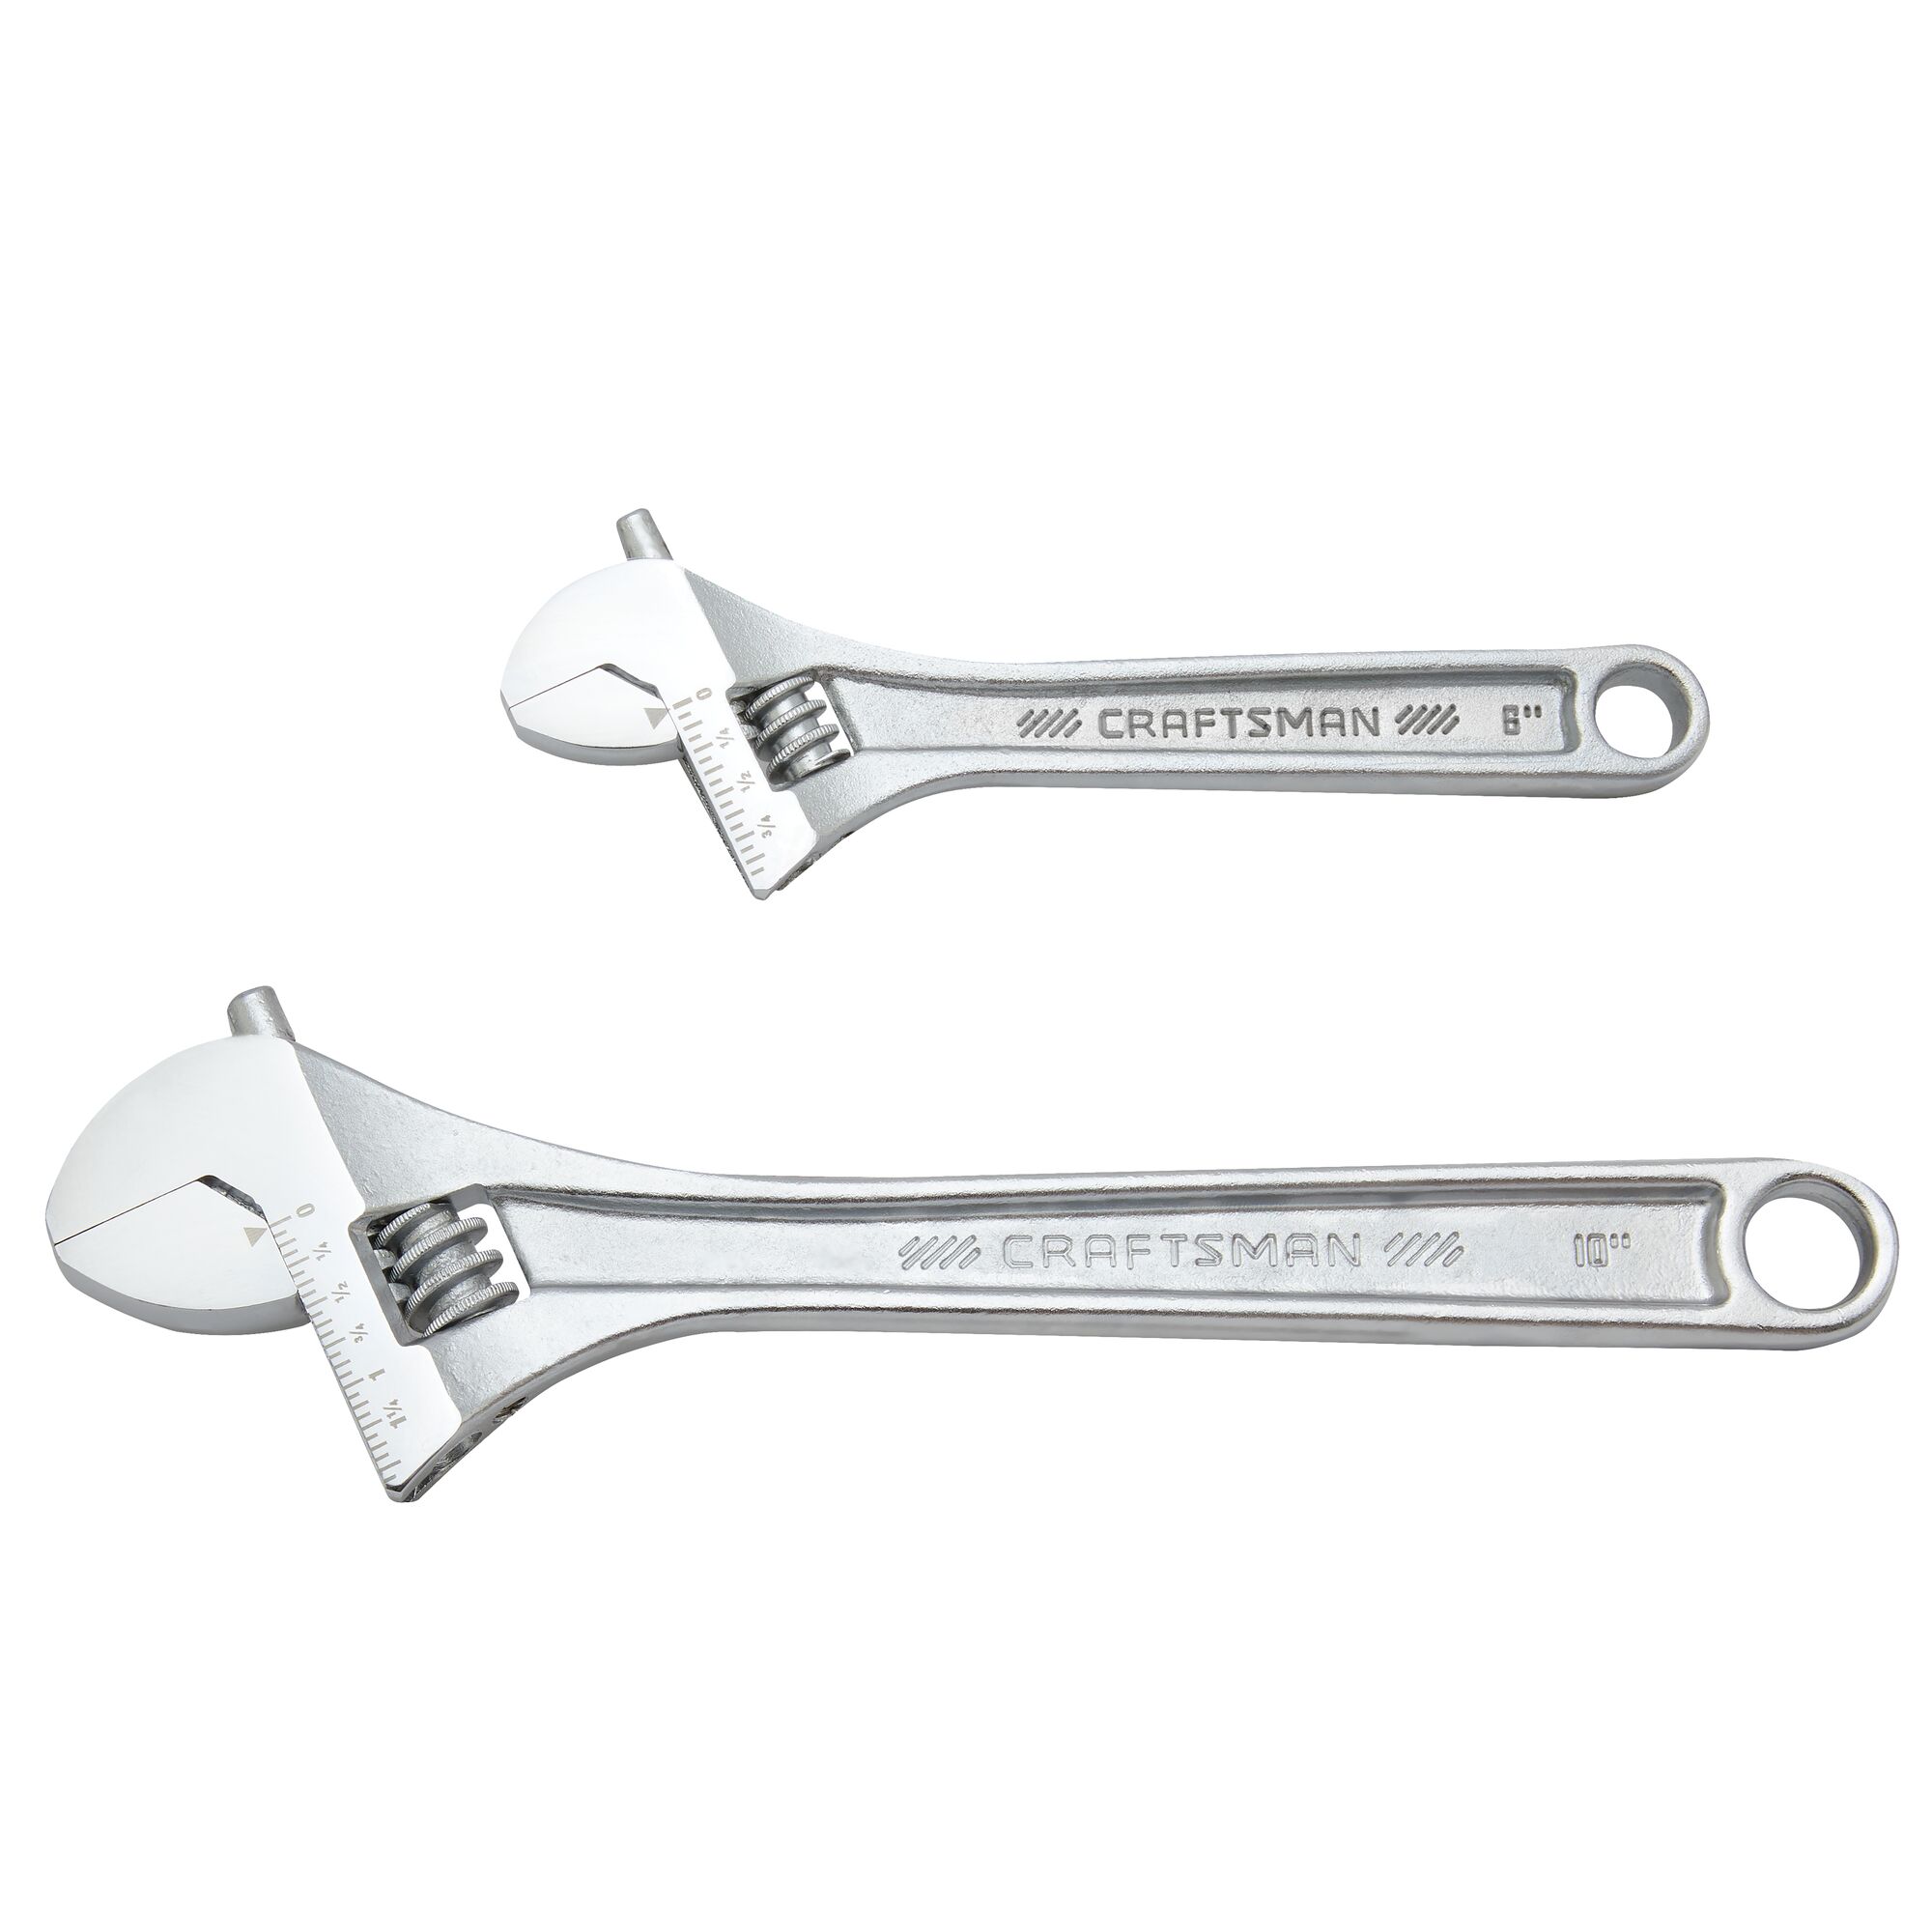 CRAFTSMAN All steel adjustable wrench set 2pc on white background